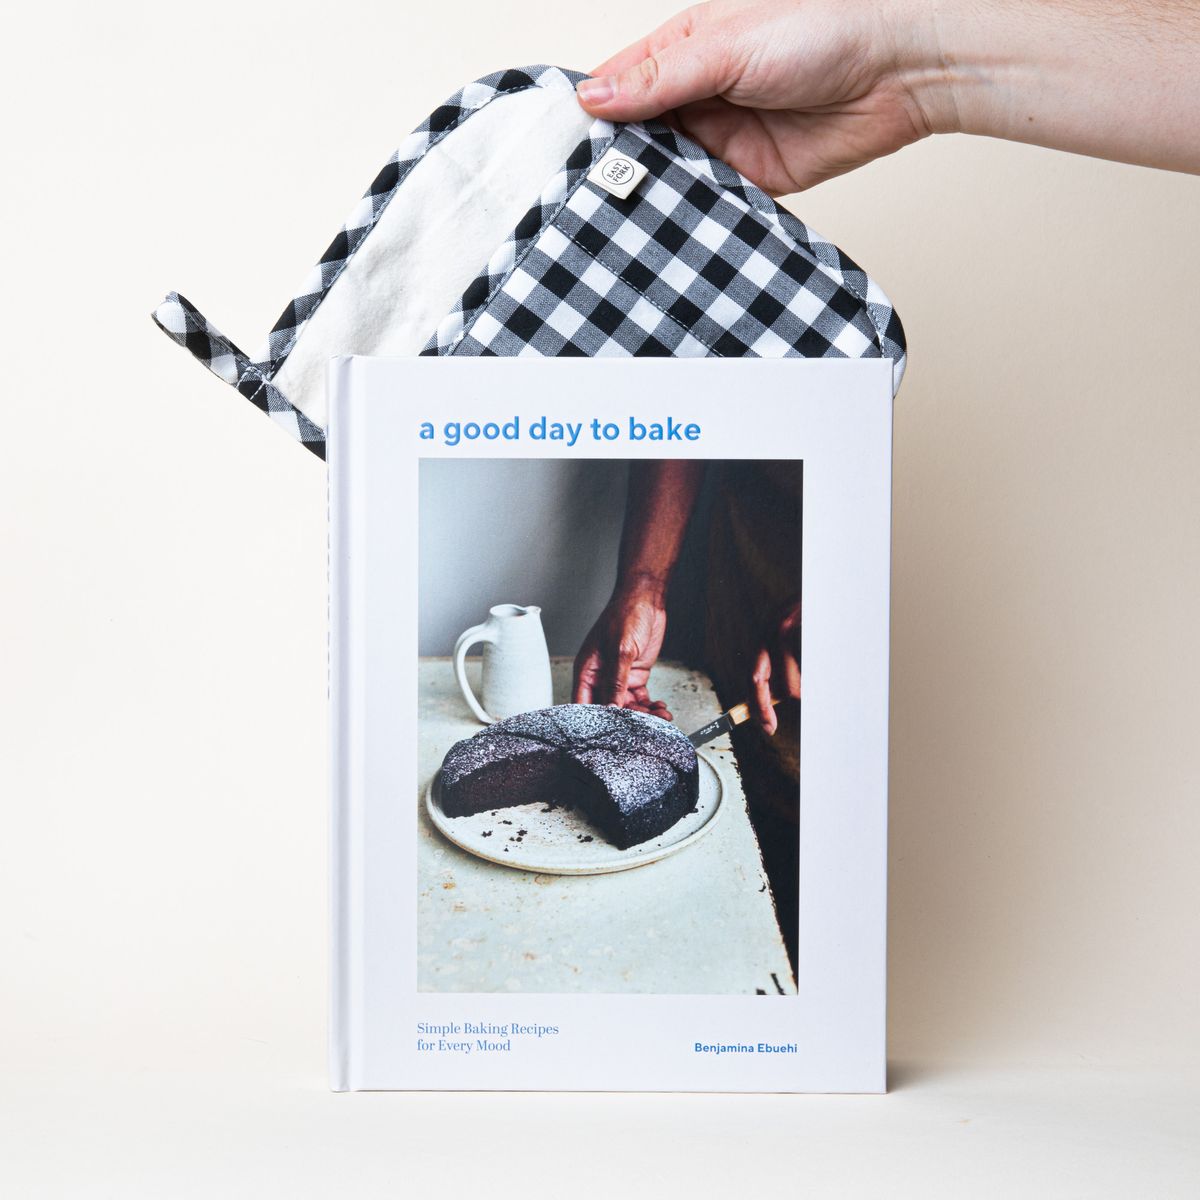 A hand holding a pot holder behind a book with a white cover and a large photo of a person cutting a cake with a title that reads "a good day to bake"